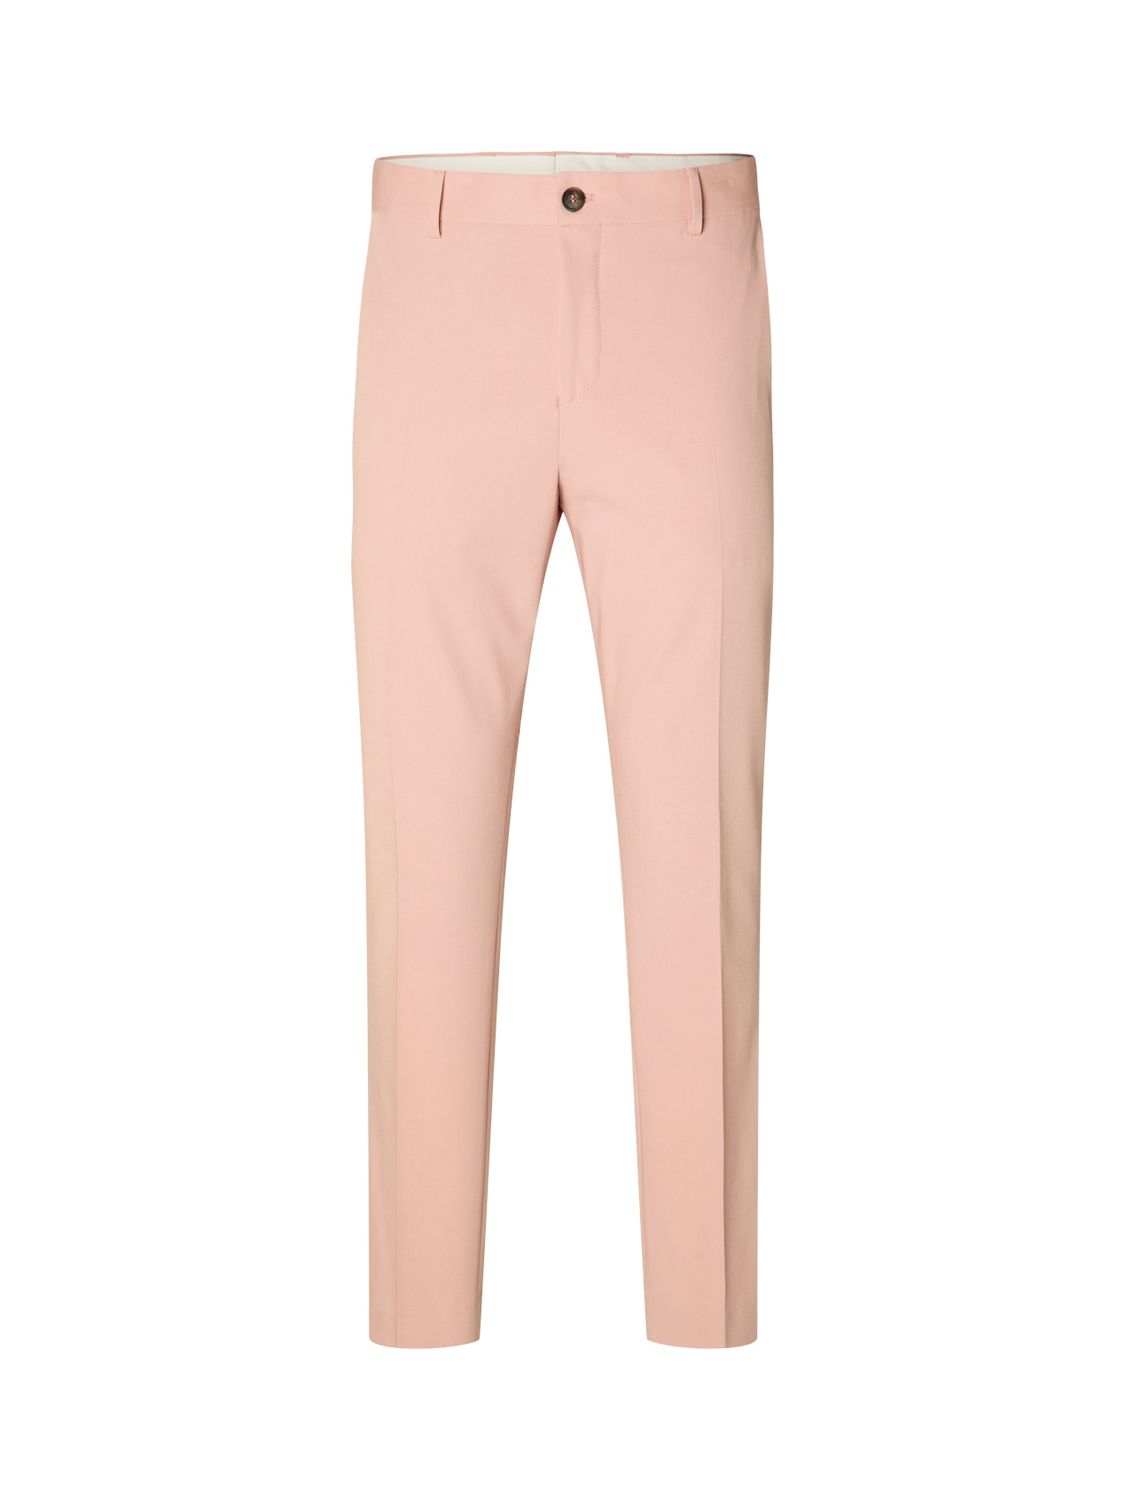 SELECTED HOMME Liam Slim Fit Suit Trousers, Misty Rose, 32R